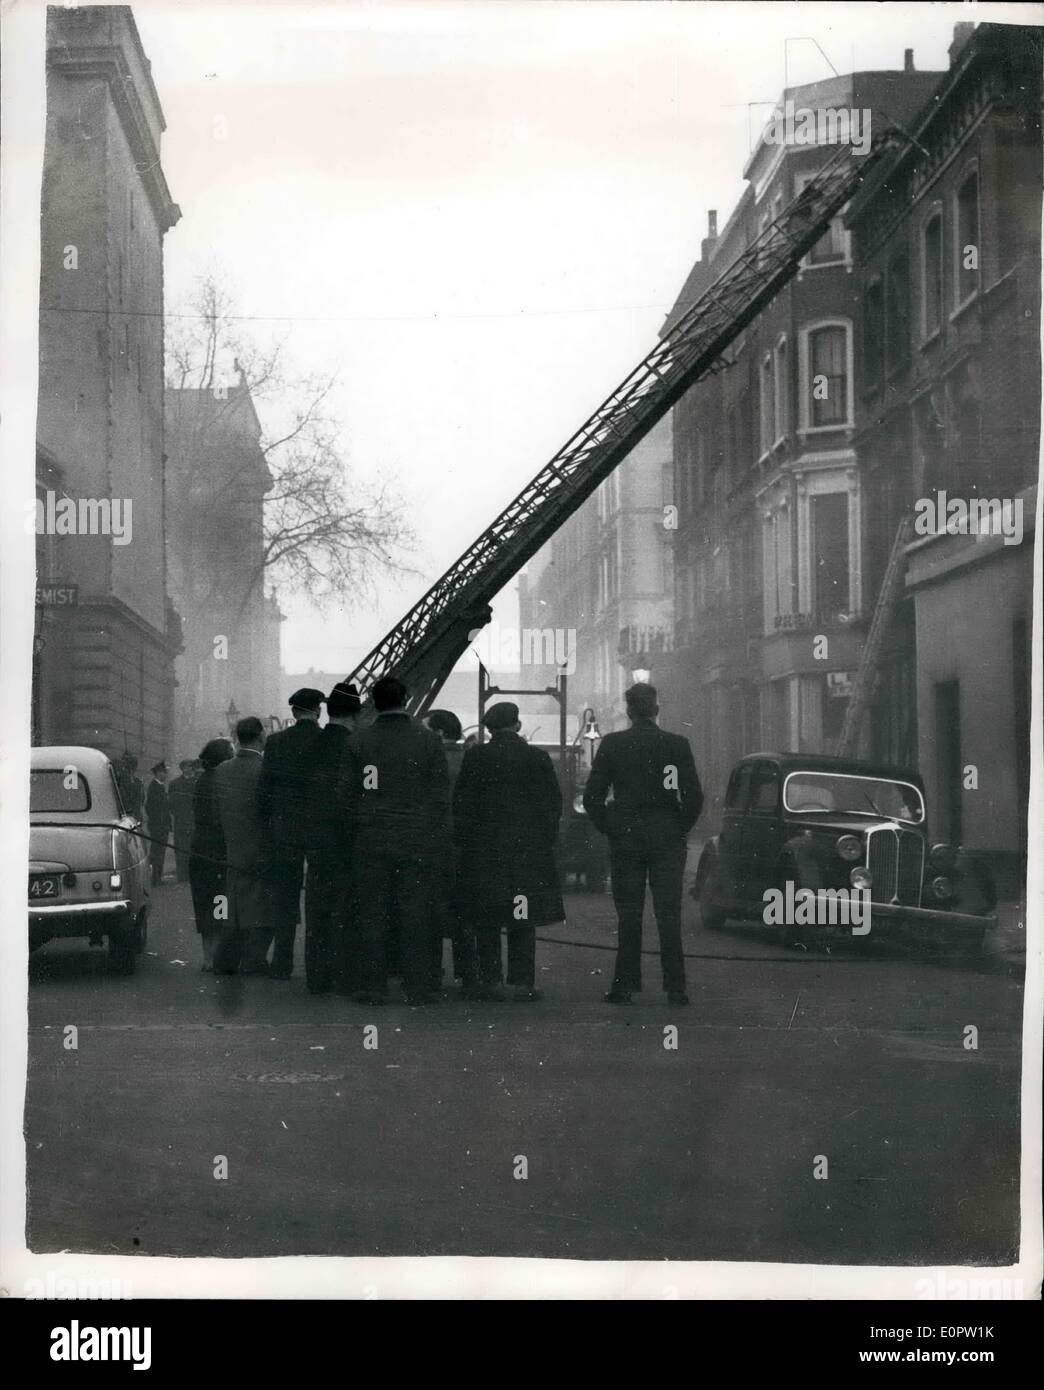 Mar. 03, 1957 - Seven Hour Siege of A Notting Hill House. Man Taken Away After Struggle. Scotland Yard called in Army tear gas experts to smoke out a man who had barricaded himself in ahouse in Shrewsbury Road, Westbourne Park, Notting Hill... The man gave himself up and was escorted away by the police. Earlier P.C. Charles Stocker was stabbed in the chest and head outside the house... He was taken to Paddington Hospital and his wounds were stitched. His tracker dog was also stabbed Stock Photo